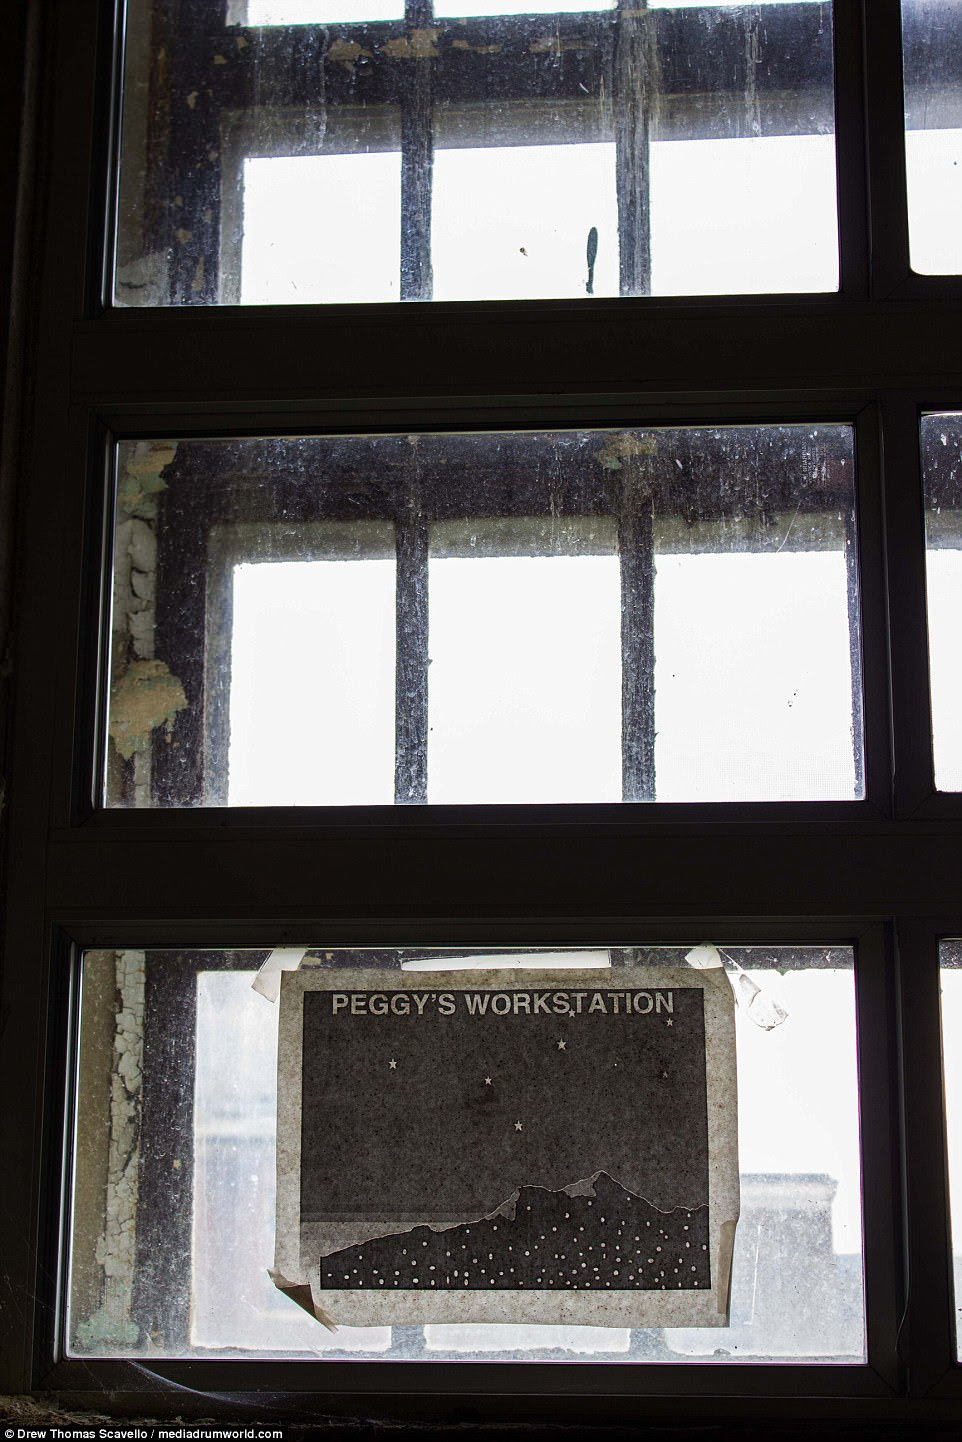 An old poster hangs in a filthy window at the former psychiatric asylum. It reads 'Peggy's Workstation' and shows a mountain at night with stars in the sky